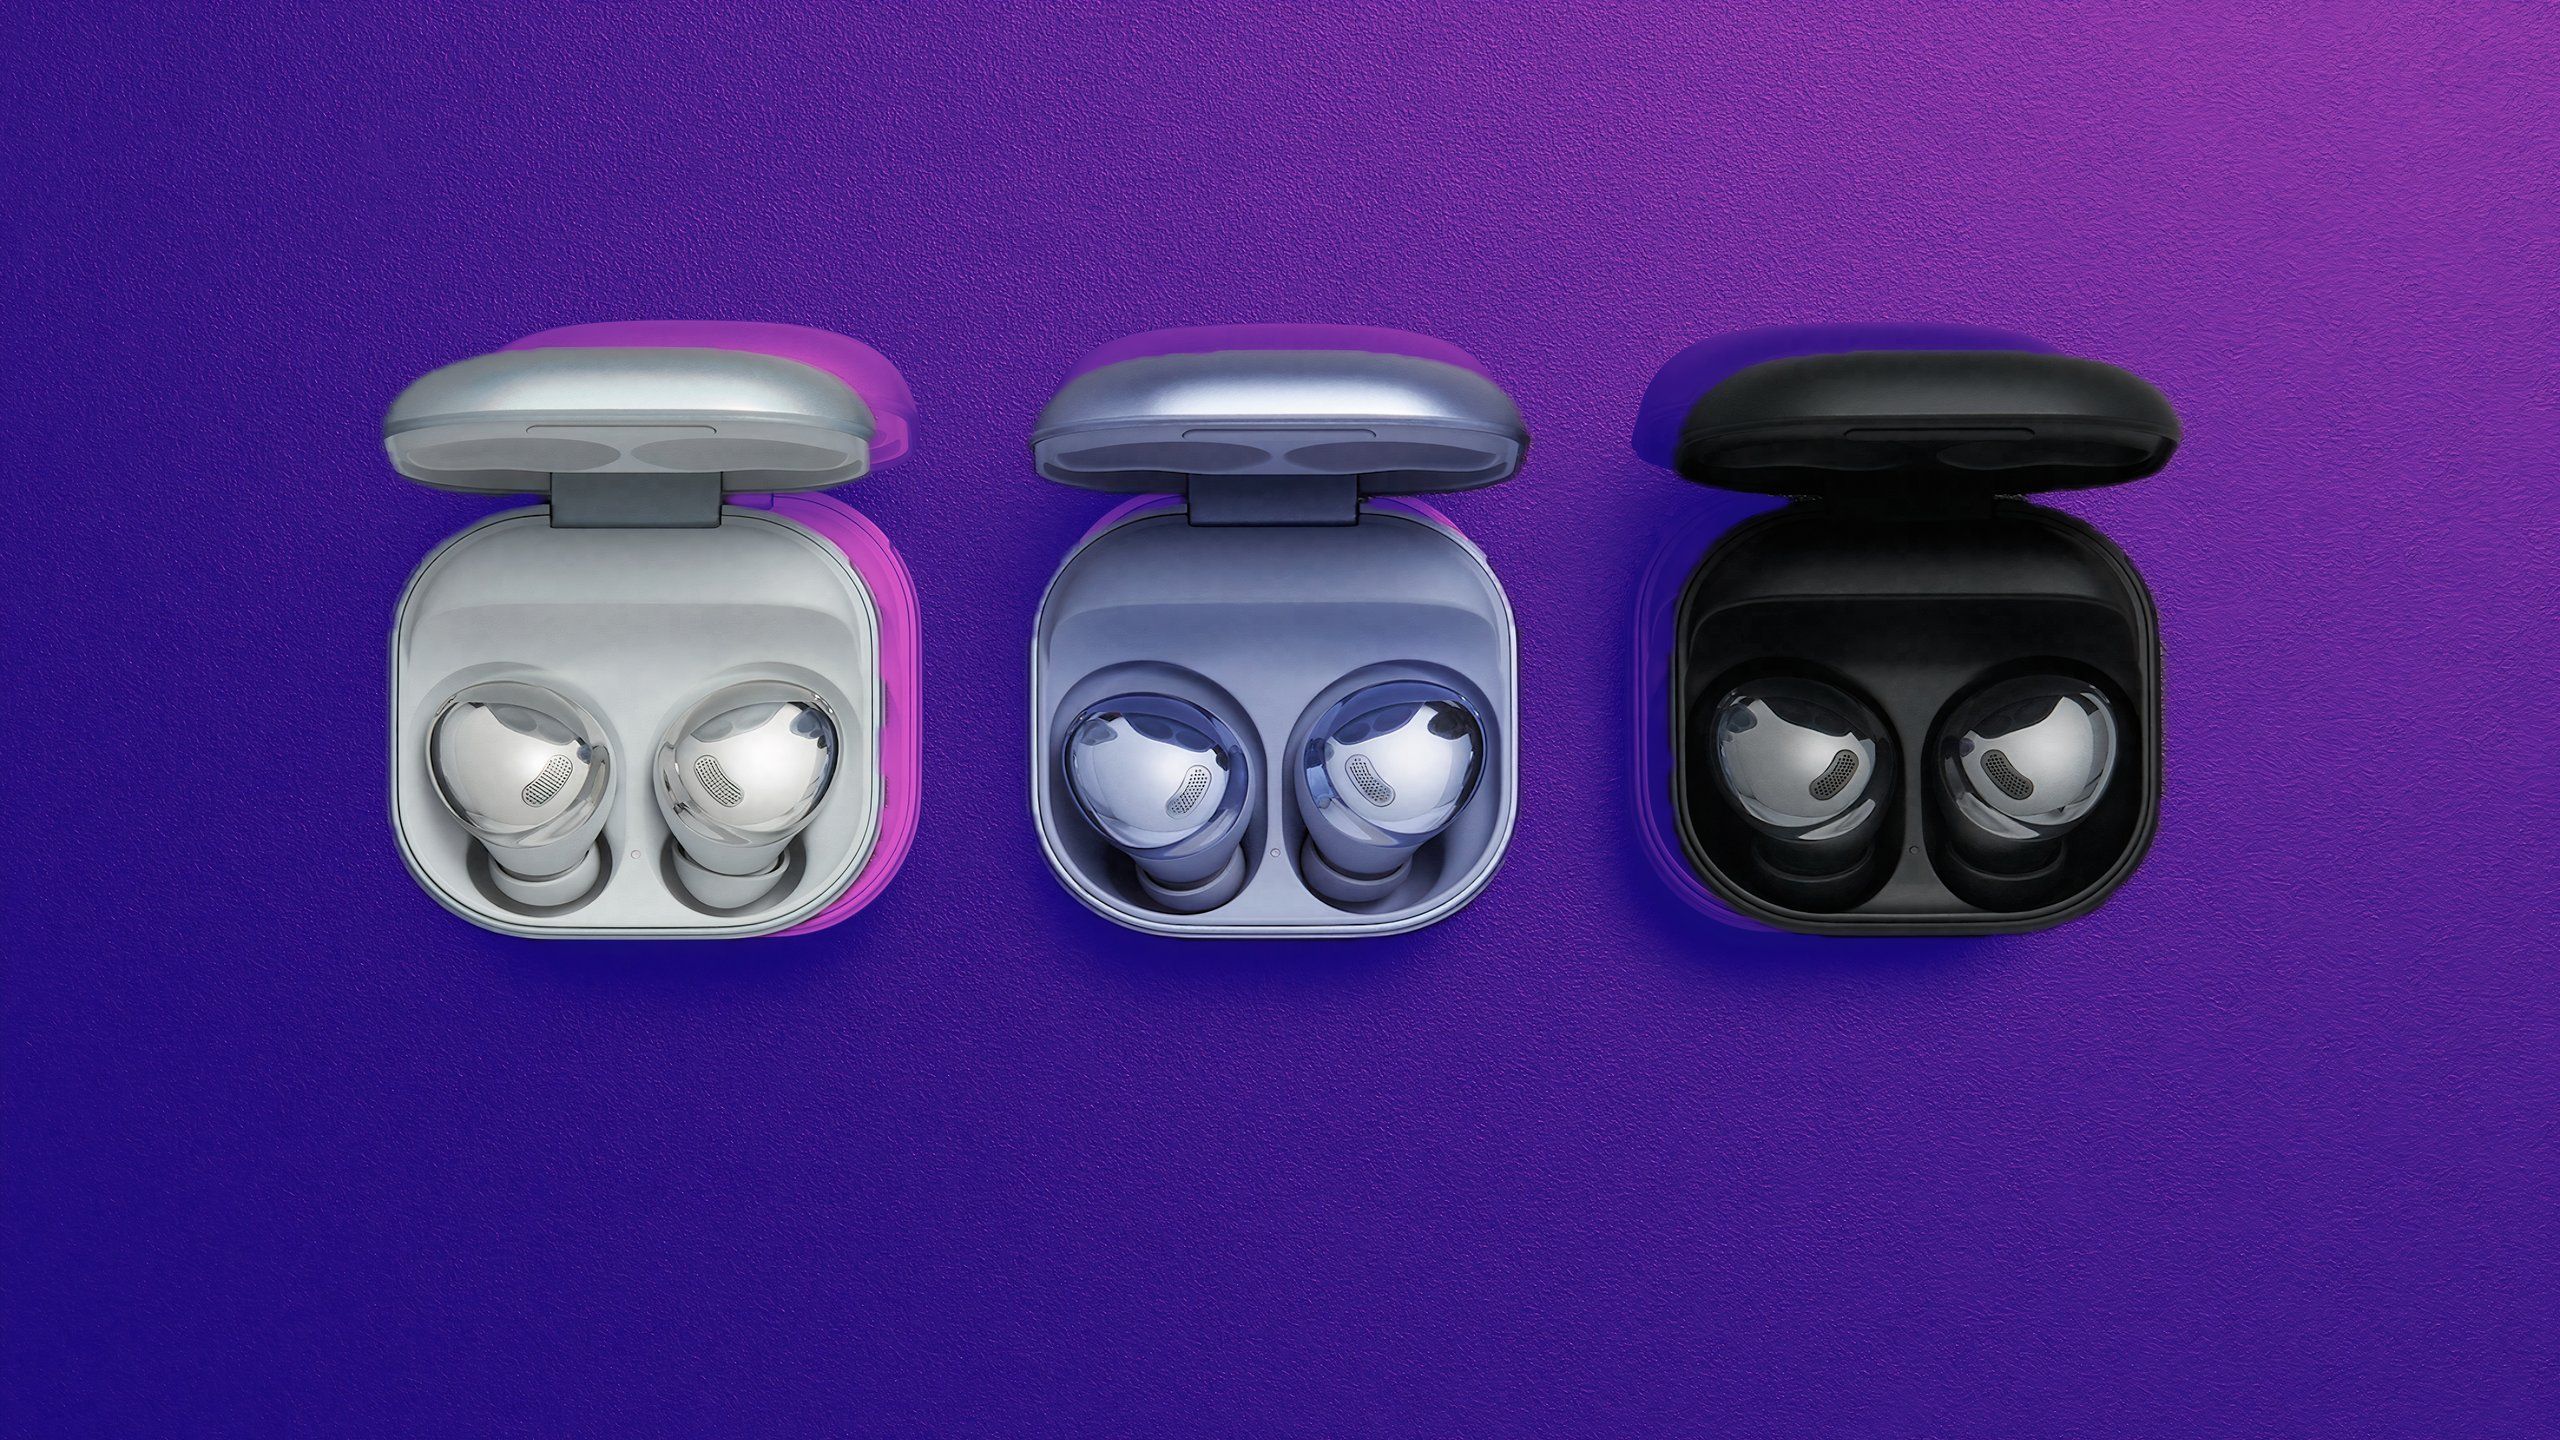 If Samsung’s Galaxy Buds 3 gets an AirPods staple, I won’t complain